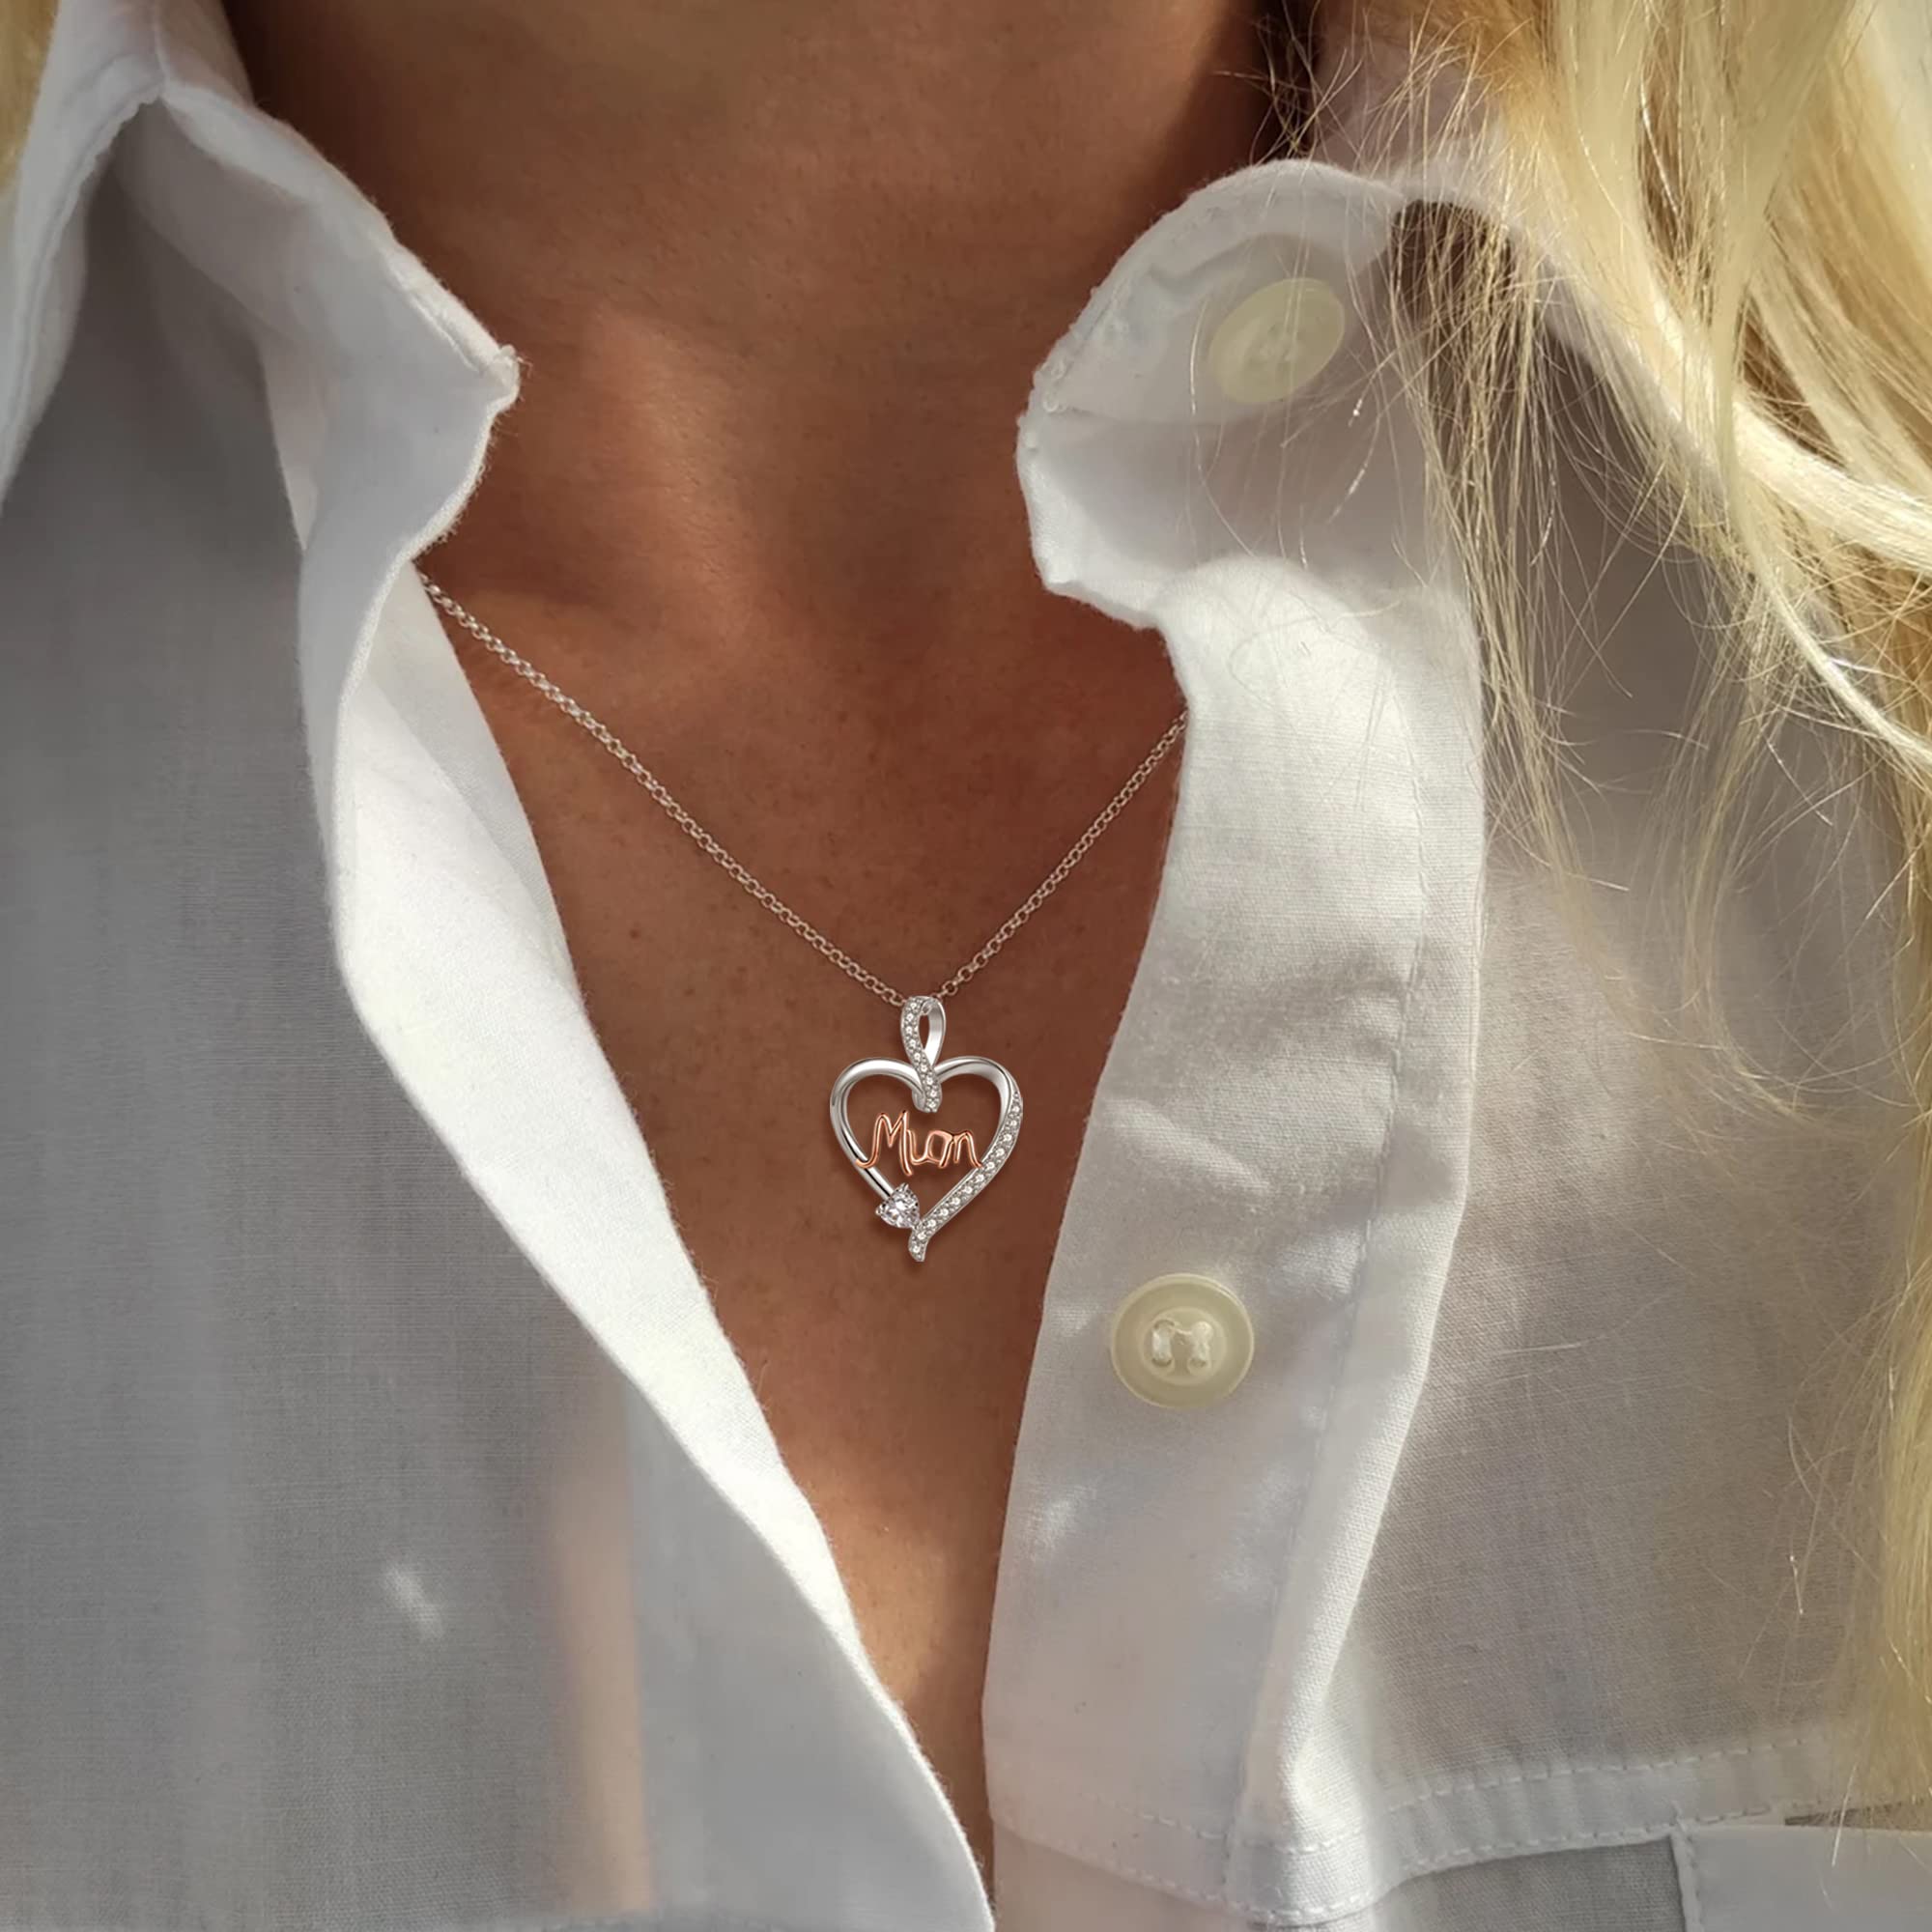 LYTOPTOP Mum Gifts for Birthday Christmas Mothers Day - S925 Sterling Silver Chain Heart Necklaces with Cubic Zirconia, Gifts for Mum from Daughter & Son with Gifts Box